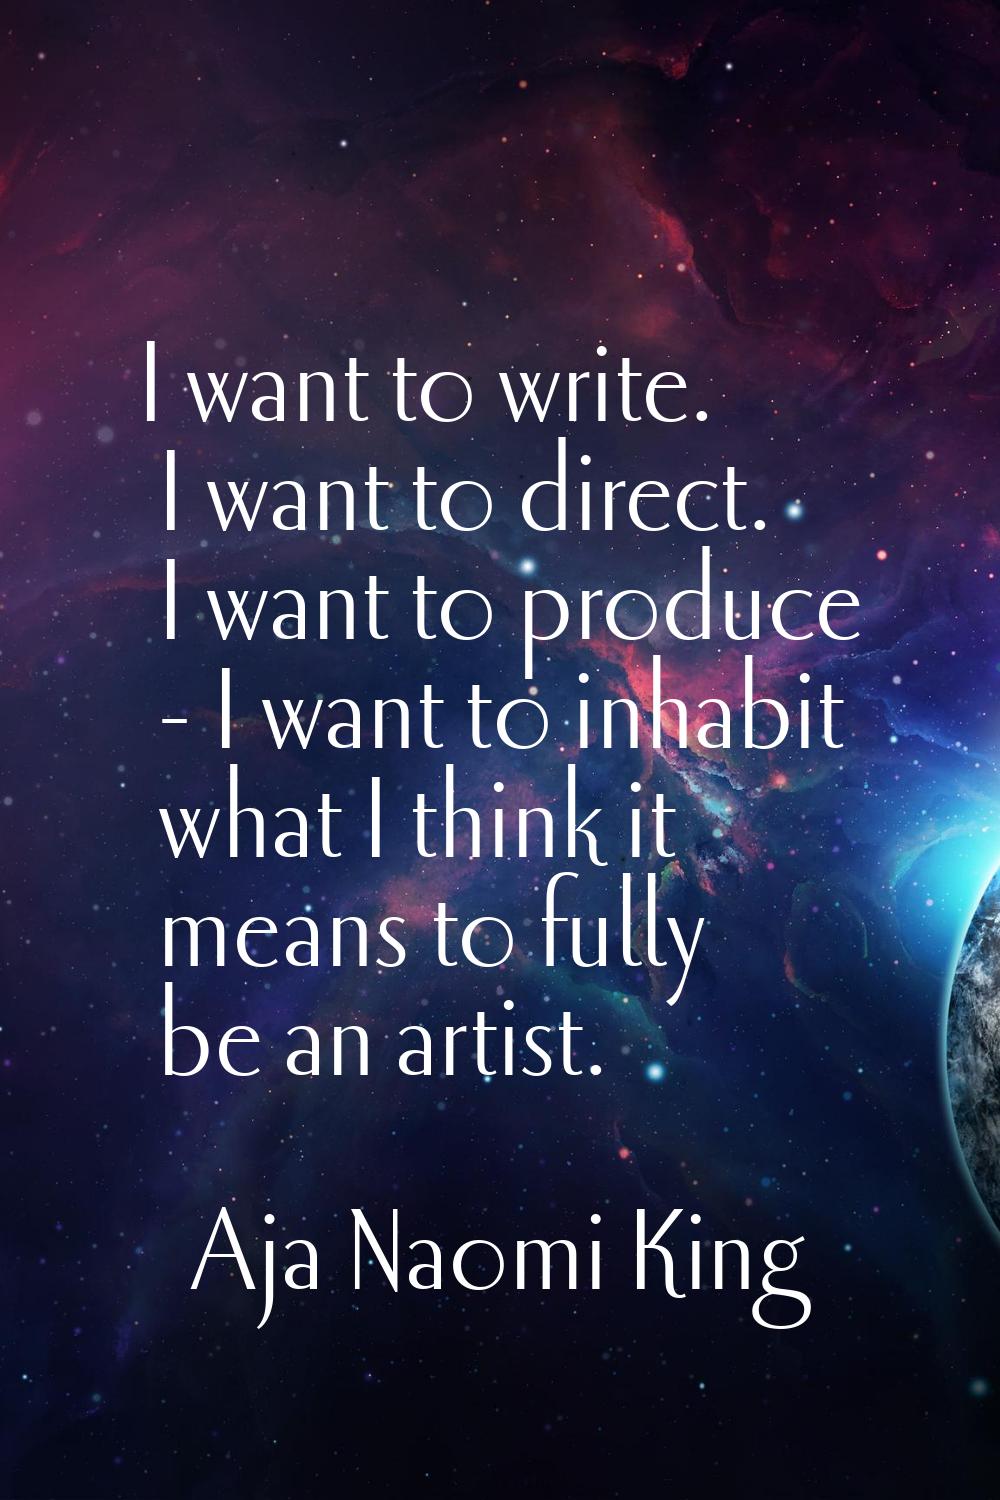 I want to write. I want to direct. I want to produce - I want to inhabit what I think it means to f